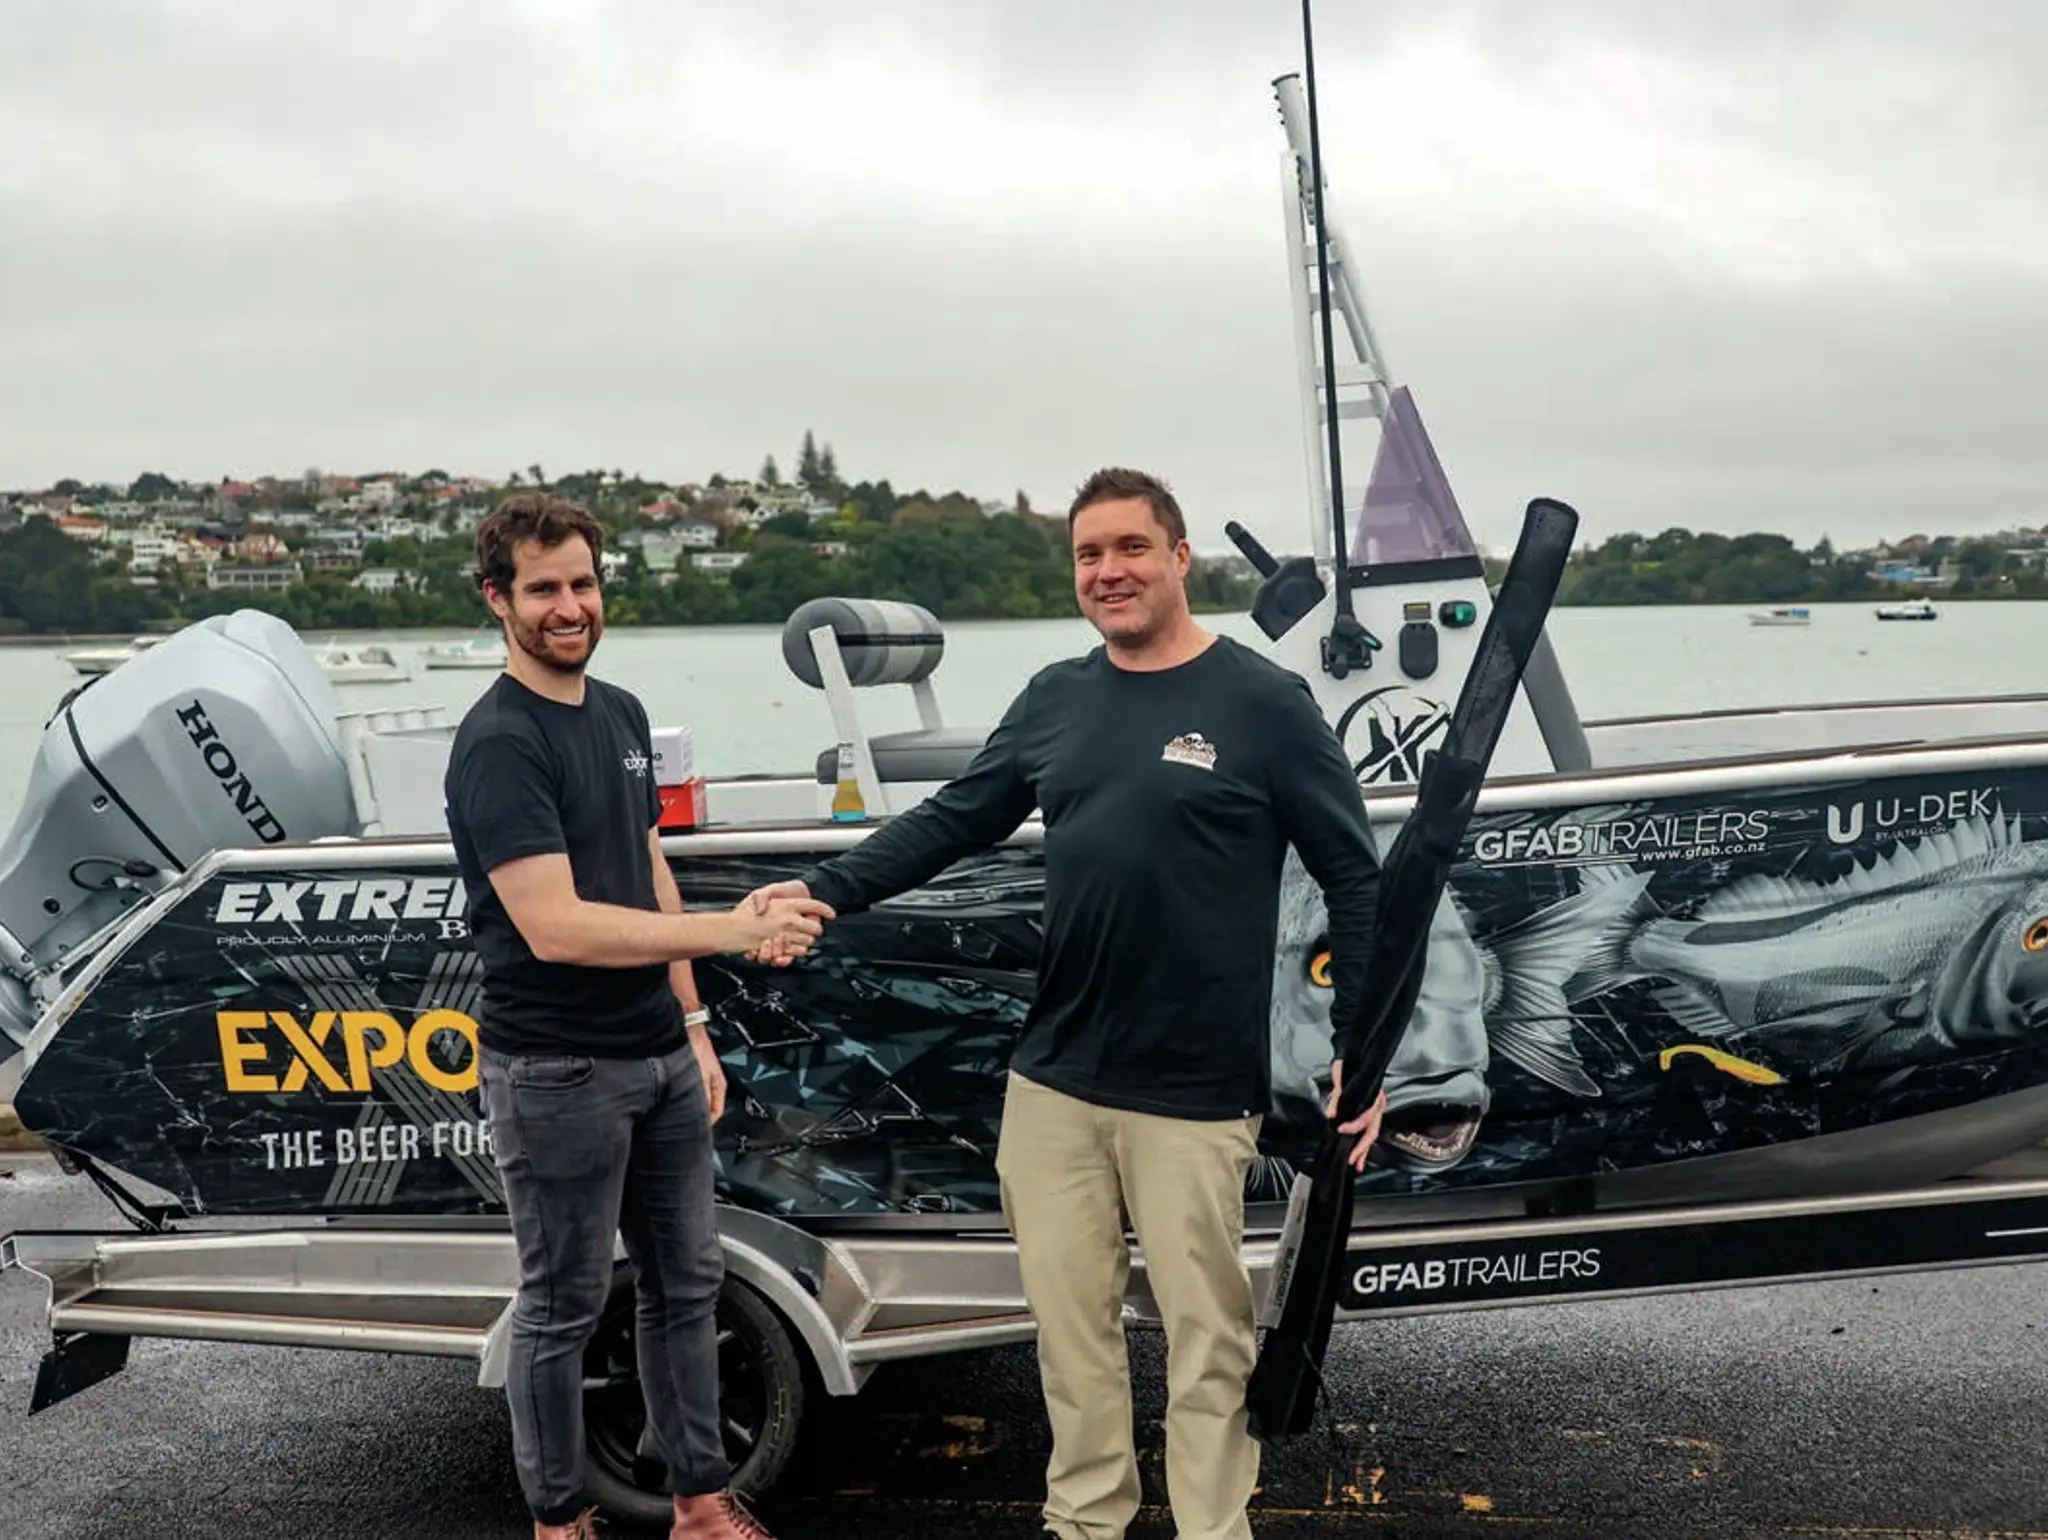 EXPORT PRIZE BOAT HEADS TO HAMILTON